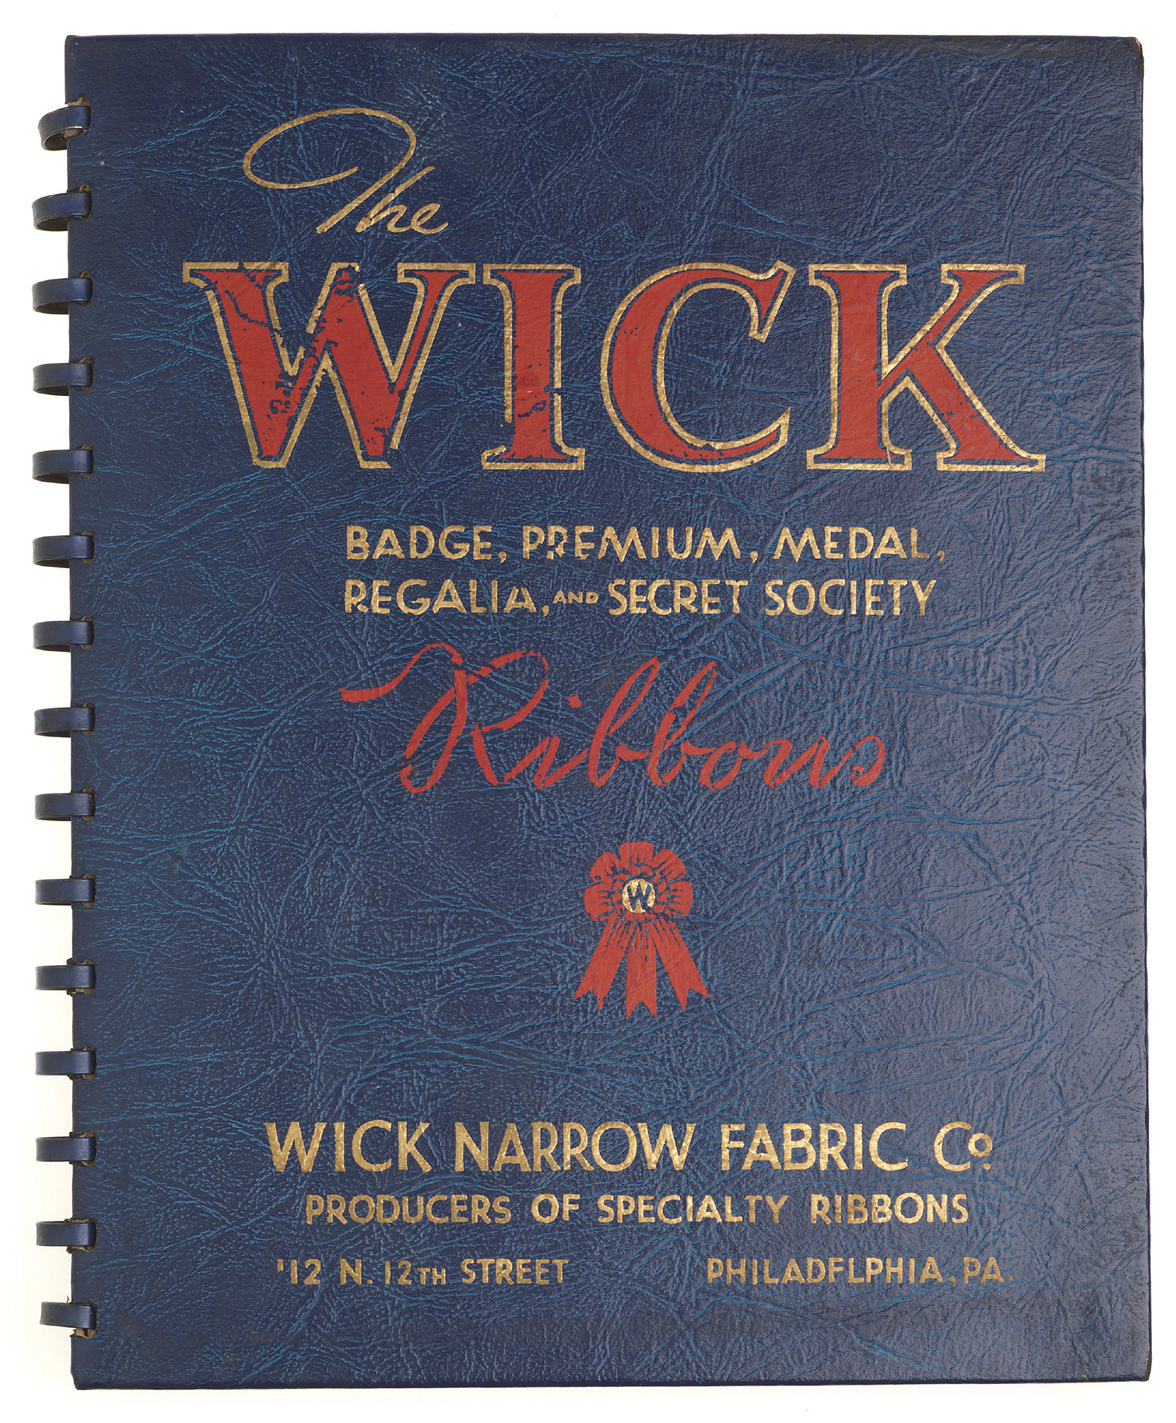 A photograph of the cover of a 1940s Wick ribbon catalogue.